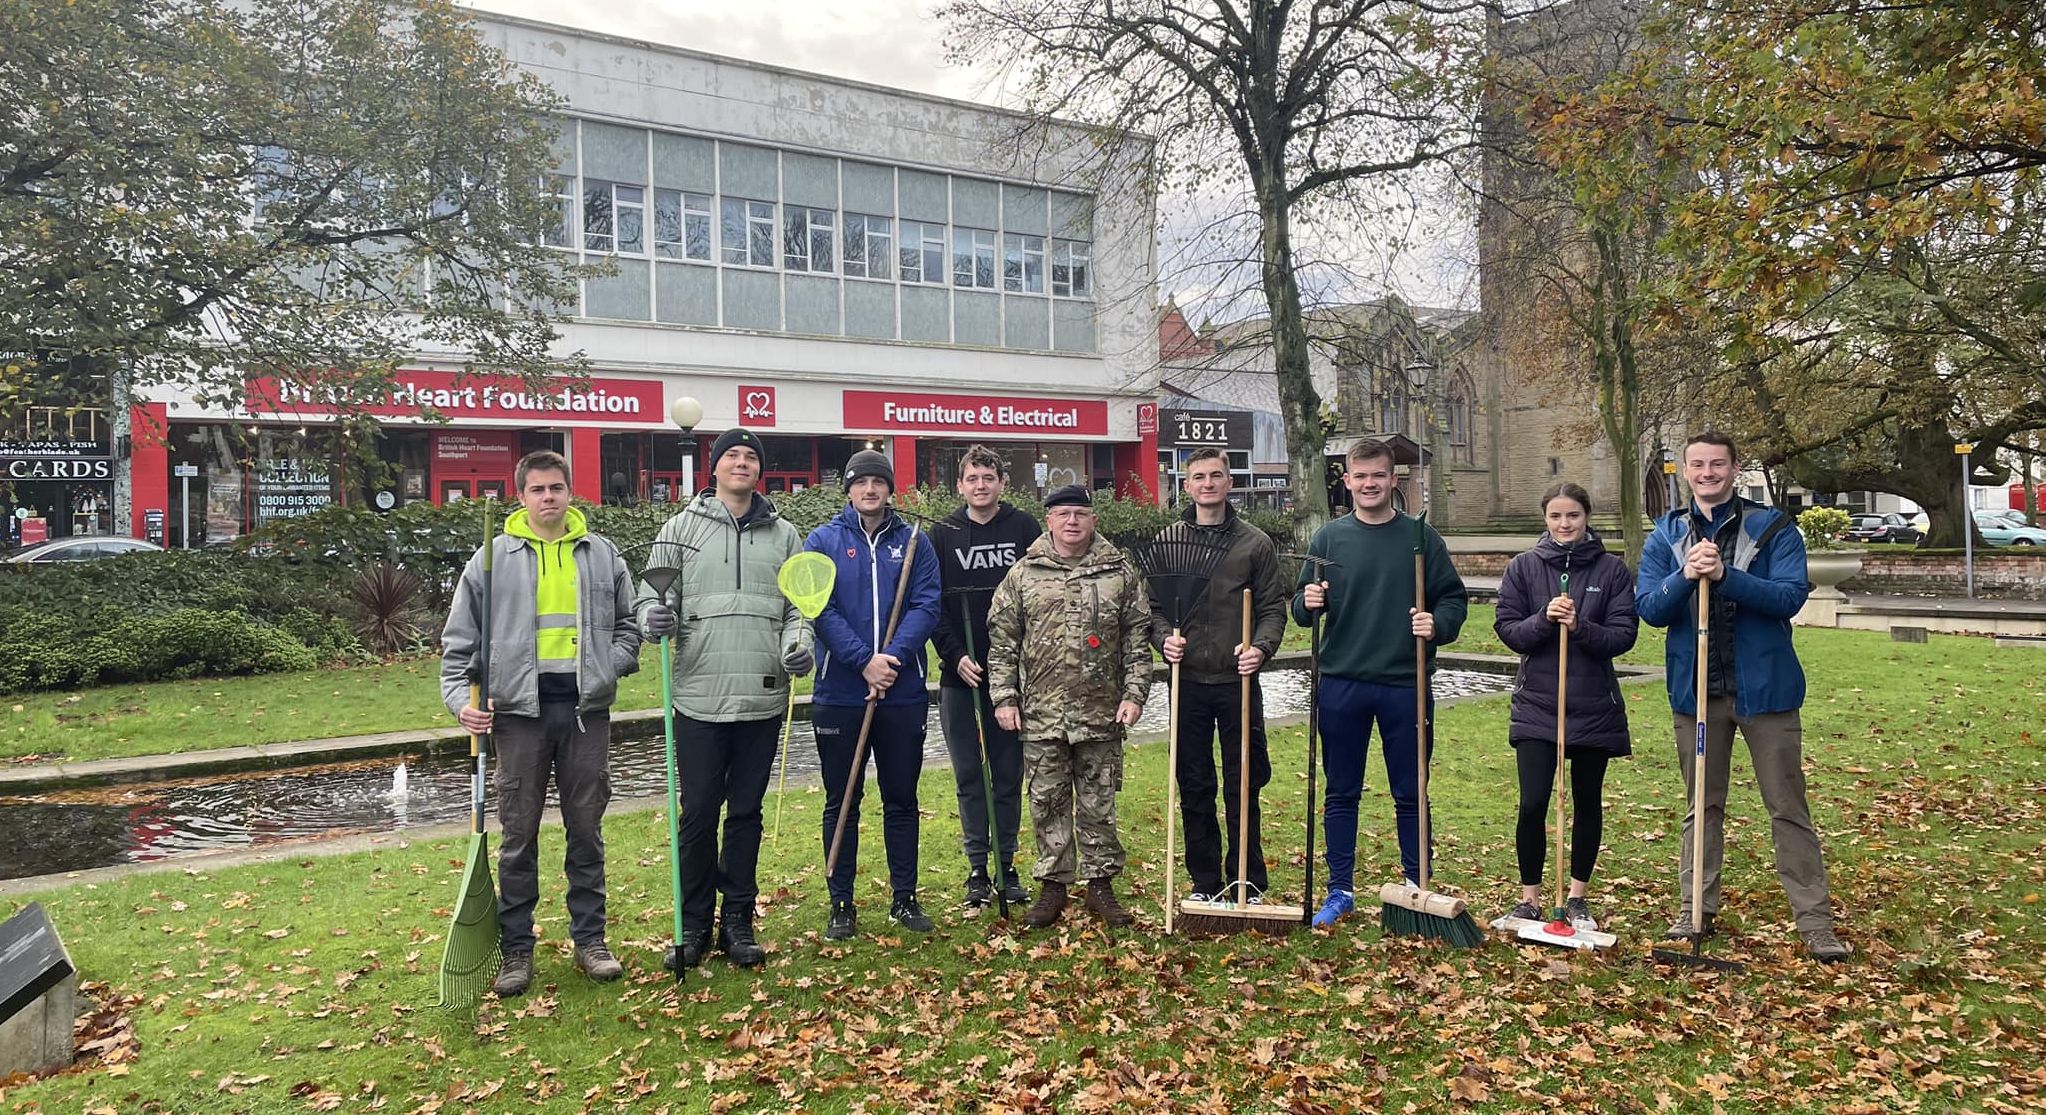 Volunteers from Southport Royal British Legion and Royal Air Force Cadets spent their Sunday making the Monument in Southport and the gardens around it look spotless in time for the Remembrance Sunday celebrations